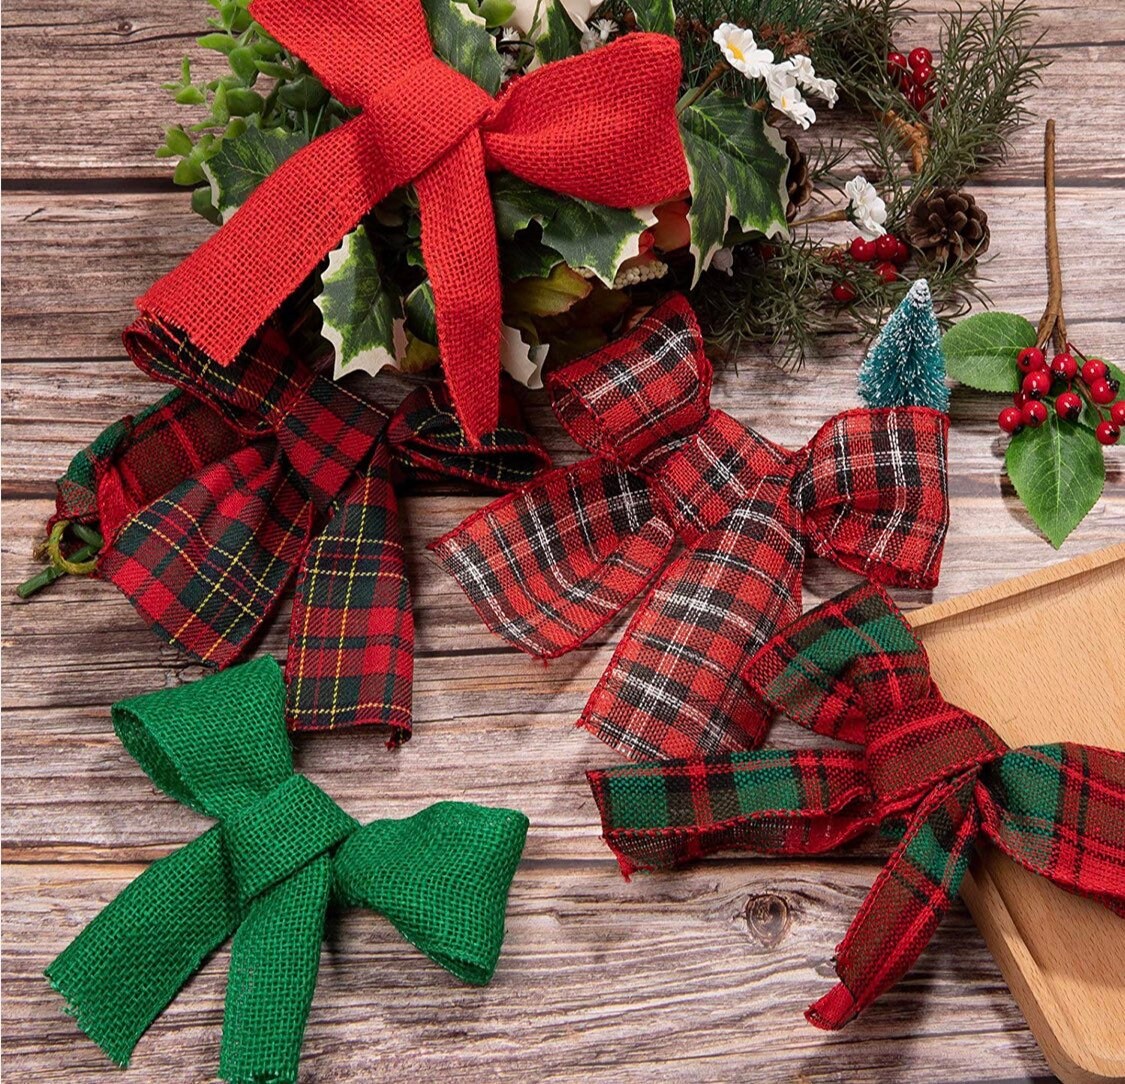 Christmas Wired Ribbon Set - 2.5” Mesh Burlap Eco Friendly Plaid Winter Ribbon for Wreaths, Gifts, Decor, and Crafts 2.5” x 5 yards